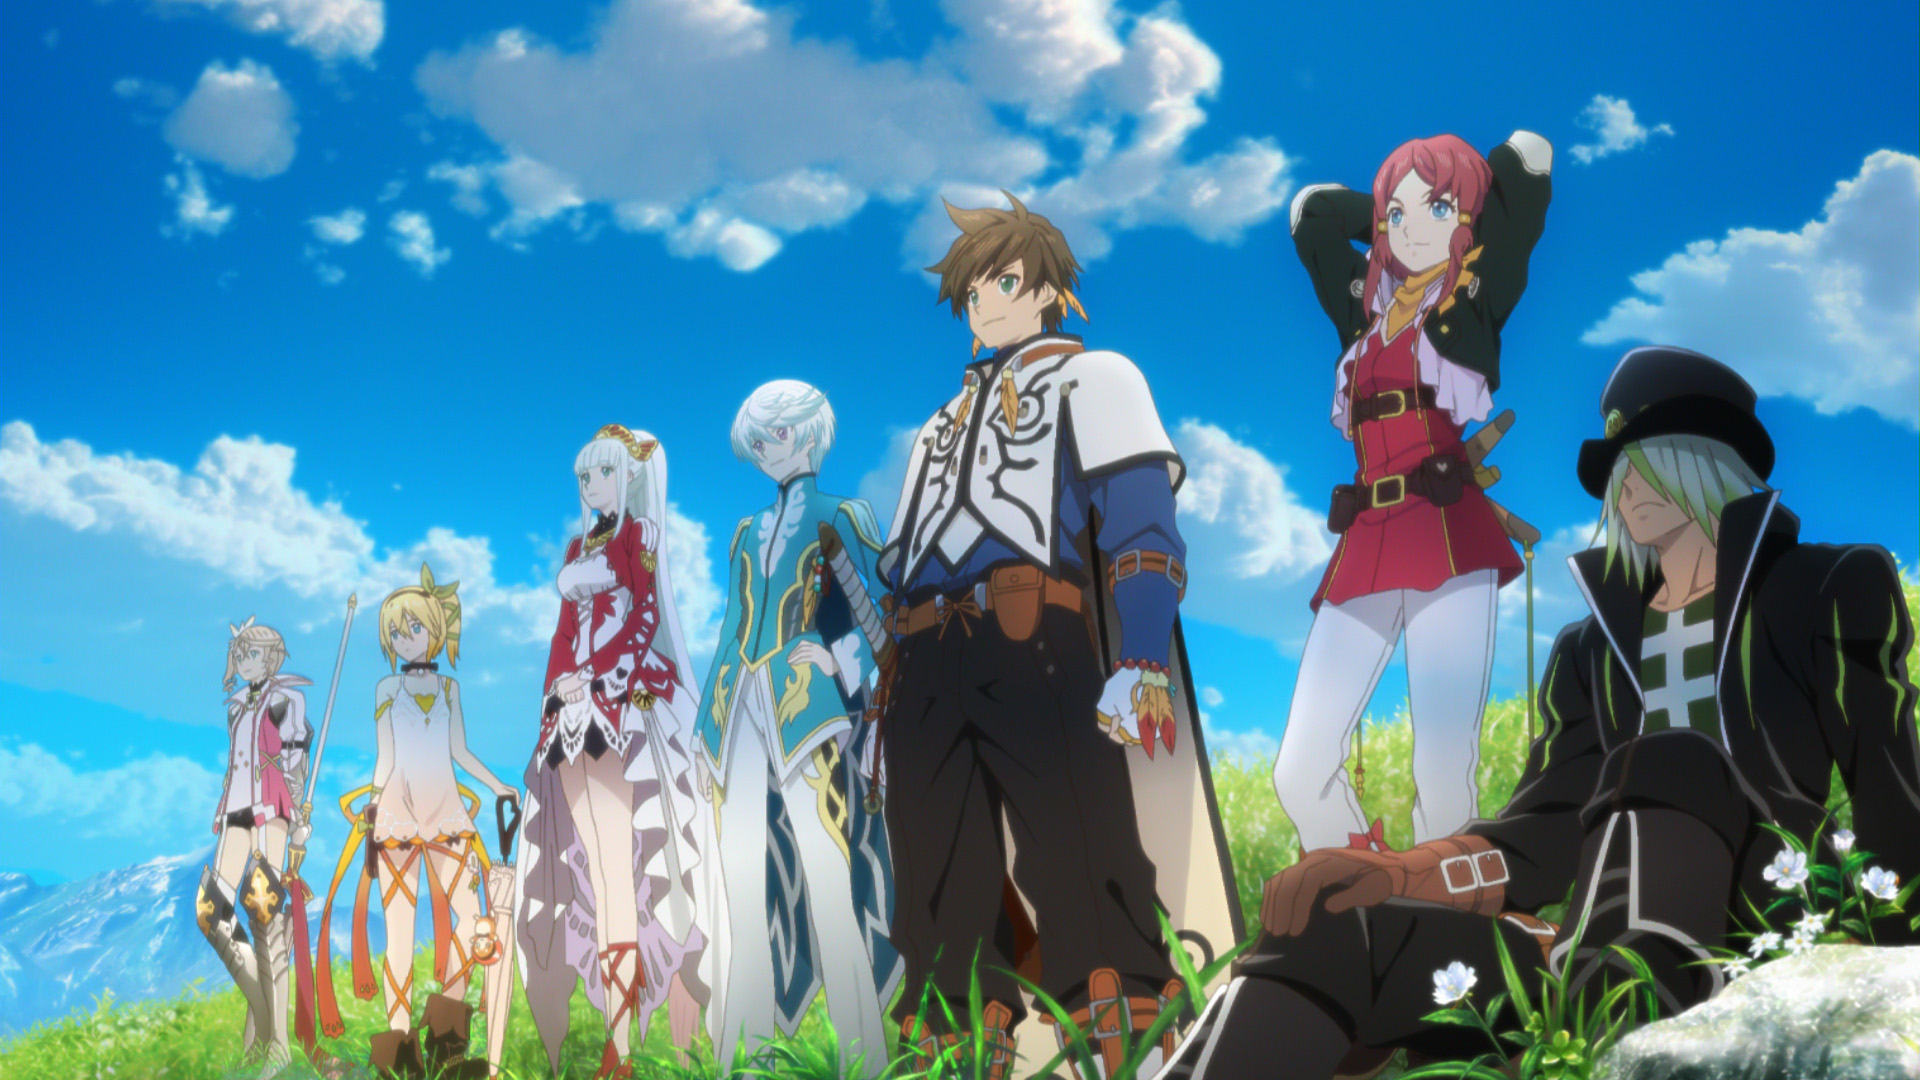 Images of Tales Of Zestiria | 1920x1080